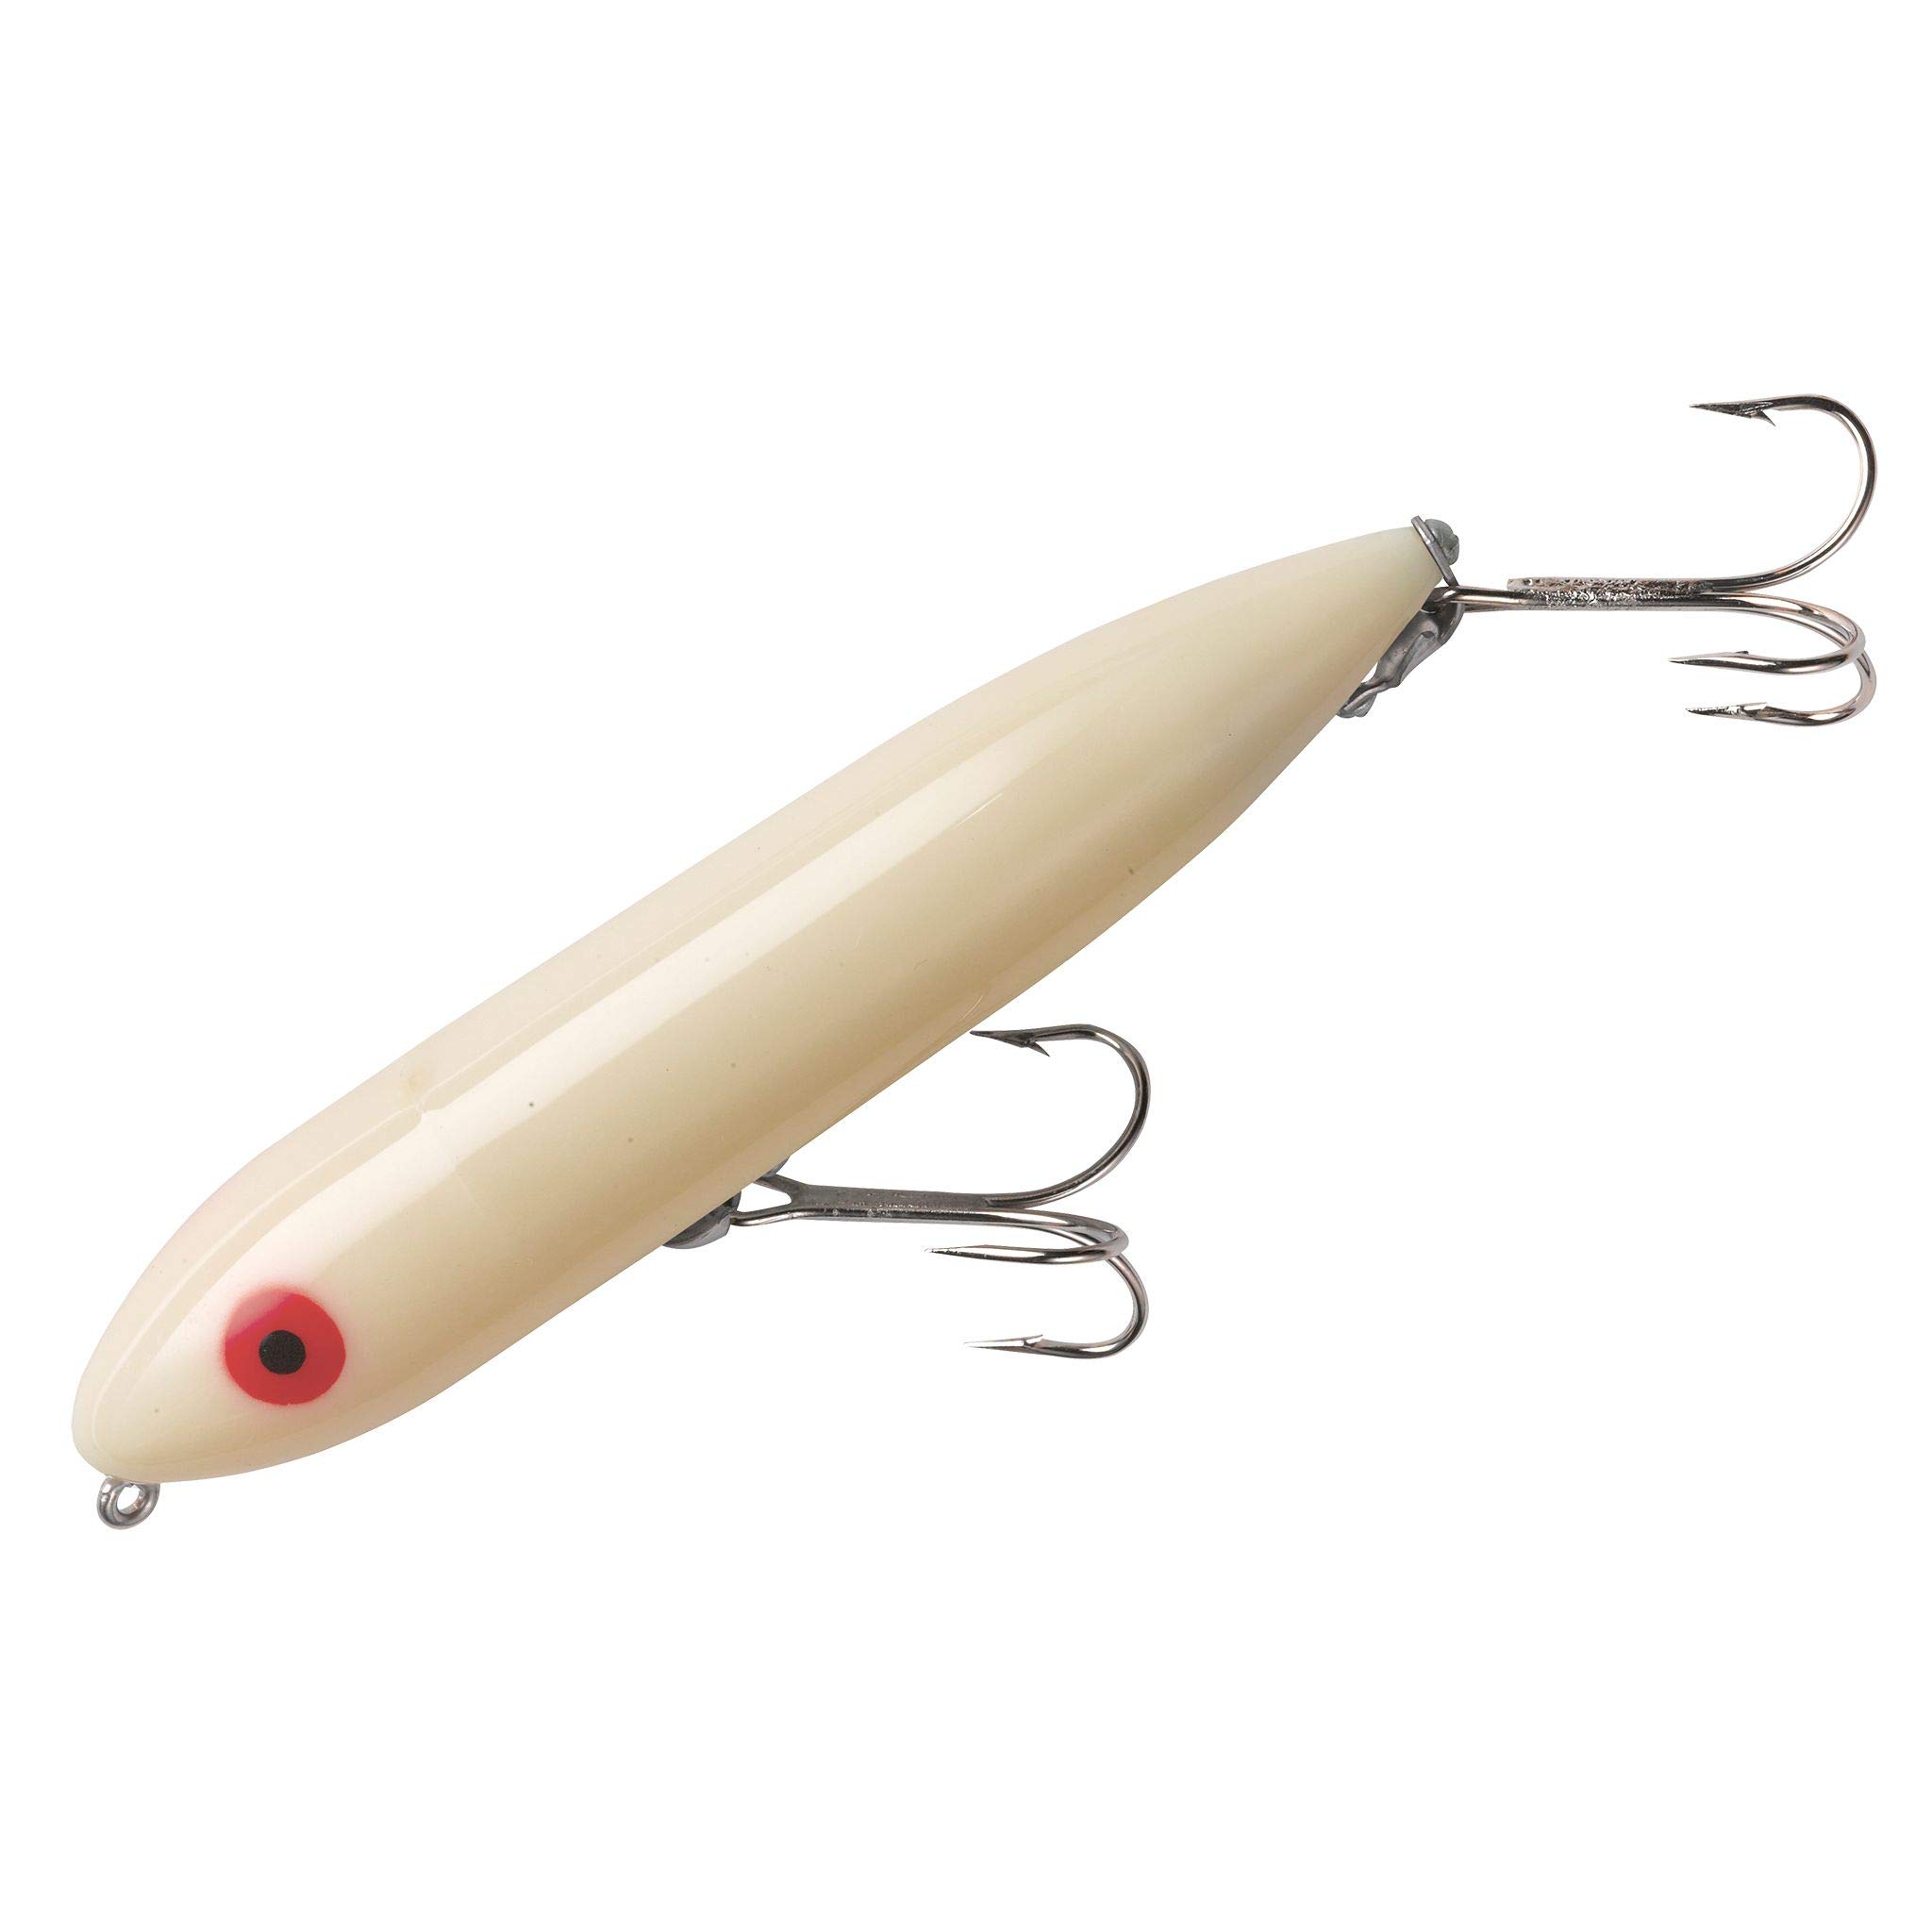  Heddon Zara Spook, BABY BASS, 3/4 OZ : Fishing Topwater Lures  And Crankbaits : Sports & Outdoors